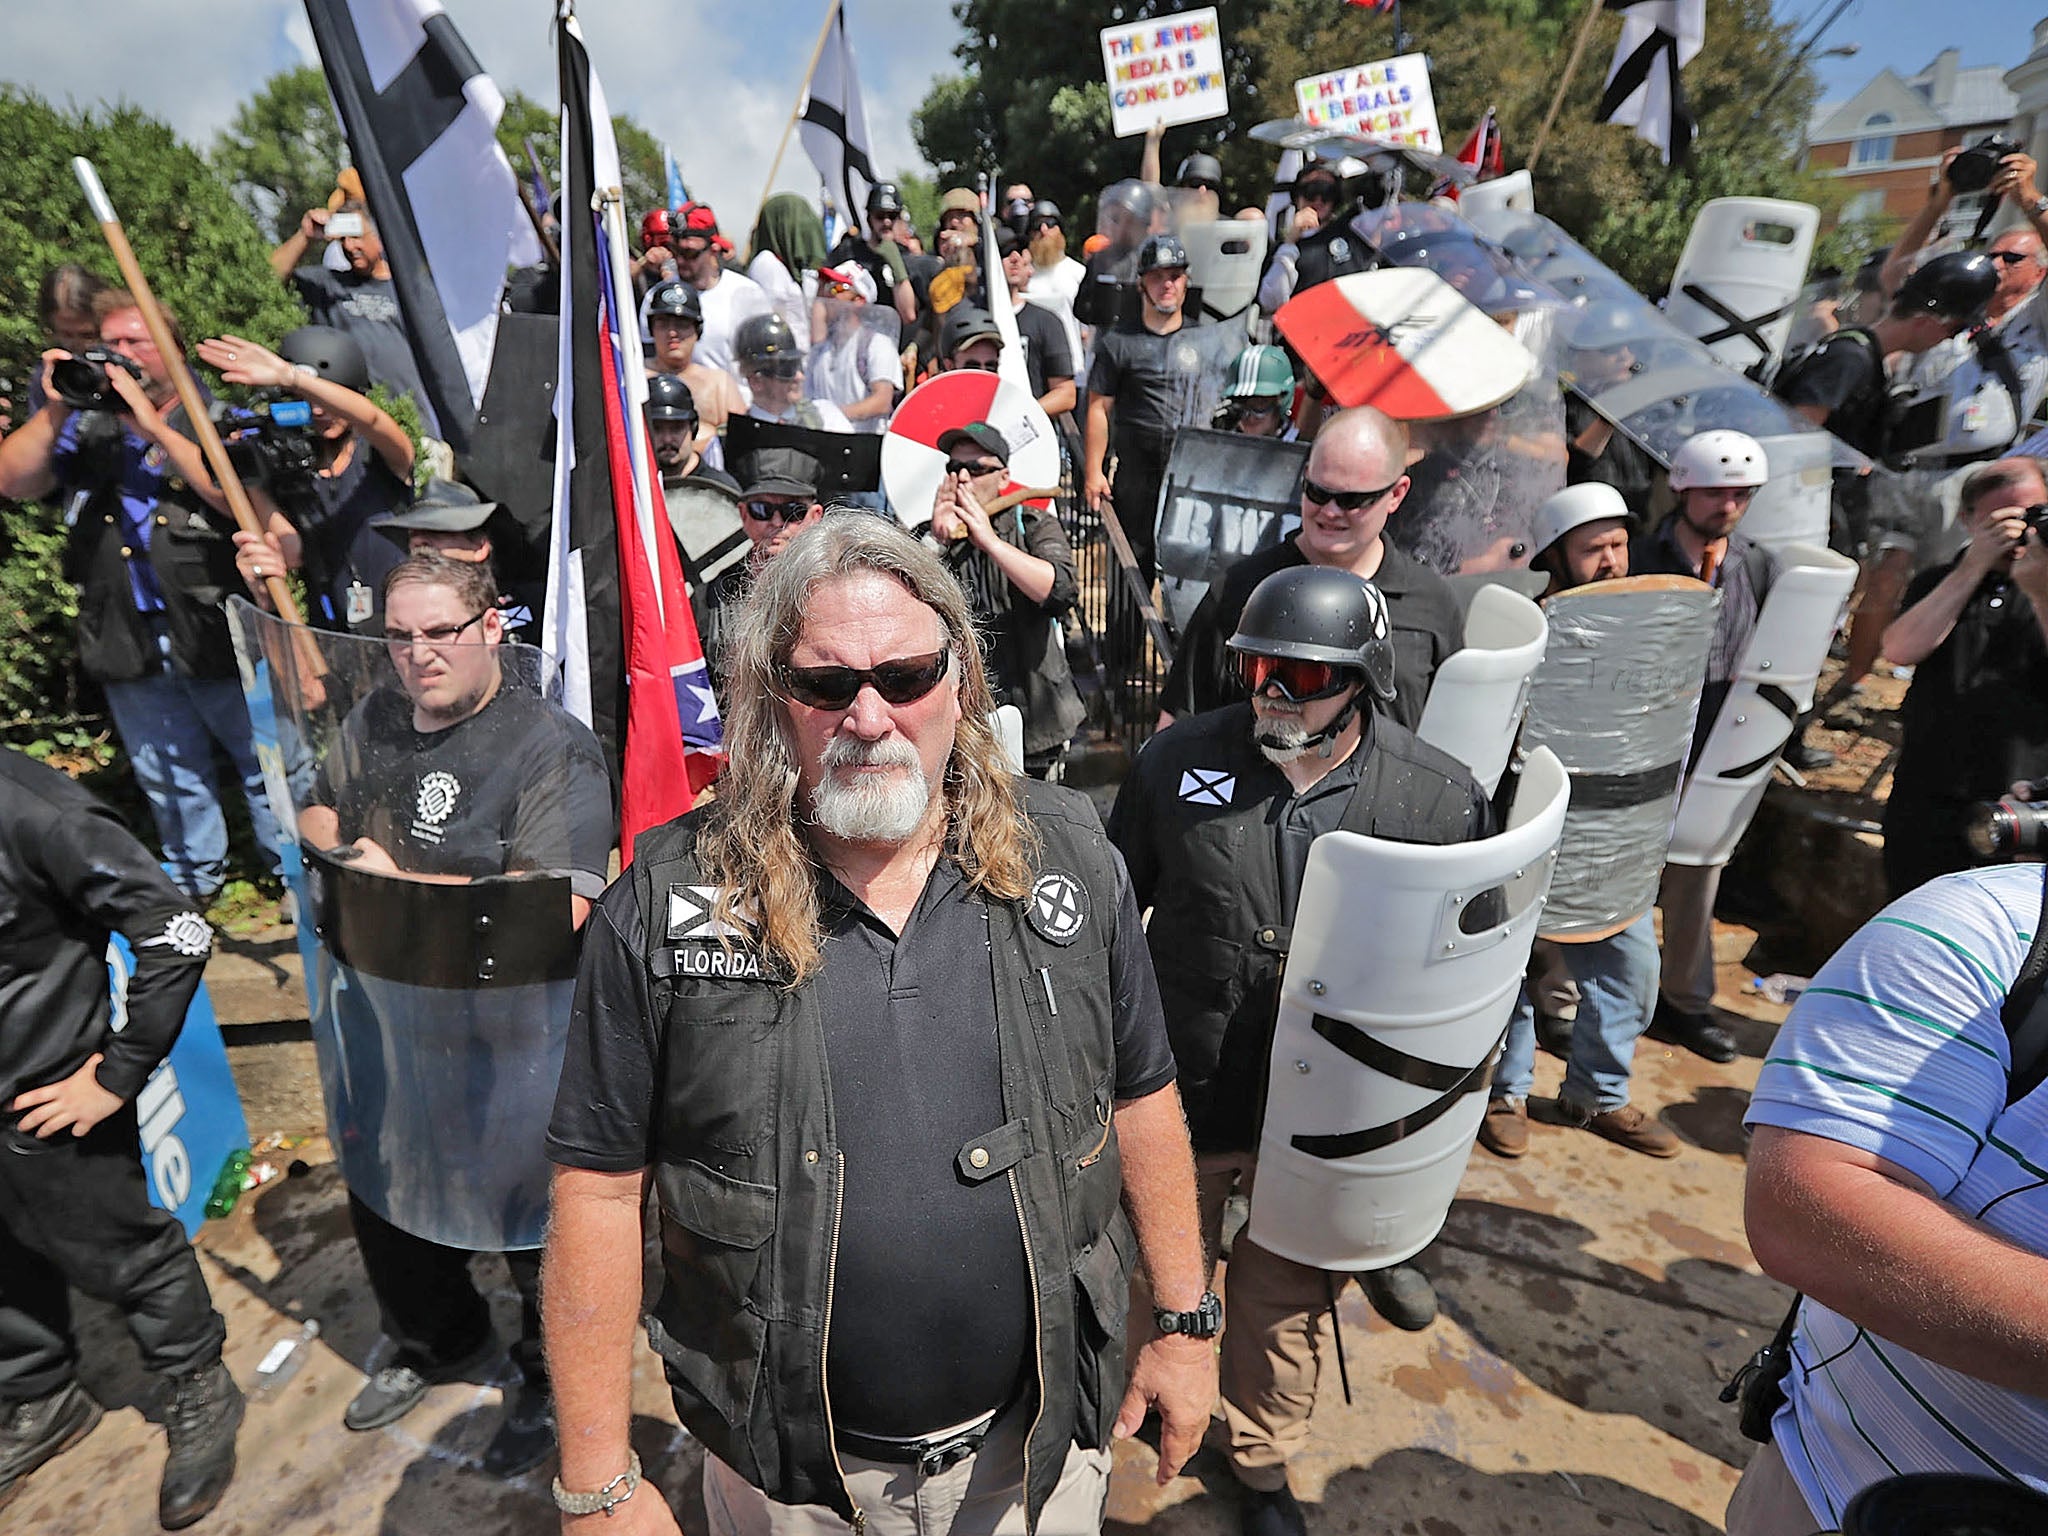 White nationalists at the ‘Unite the Right’ rally in Charlottesville, Virginia, last August